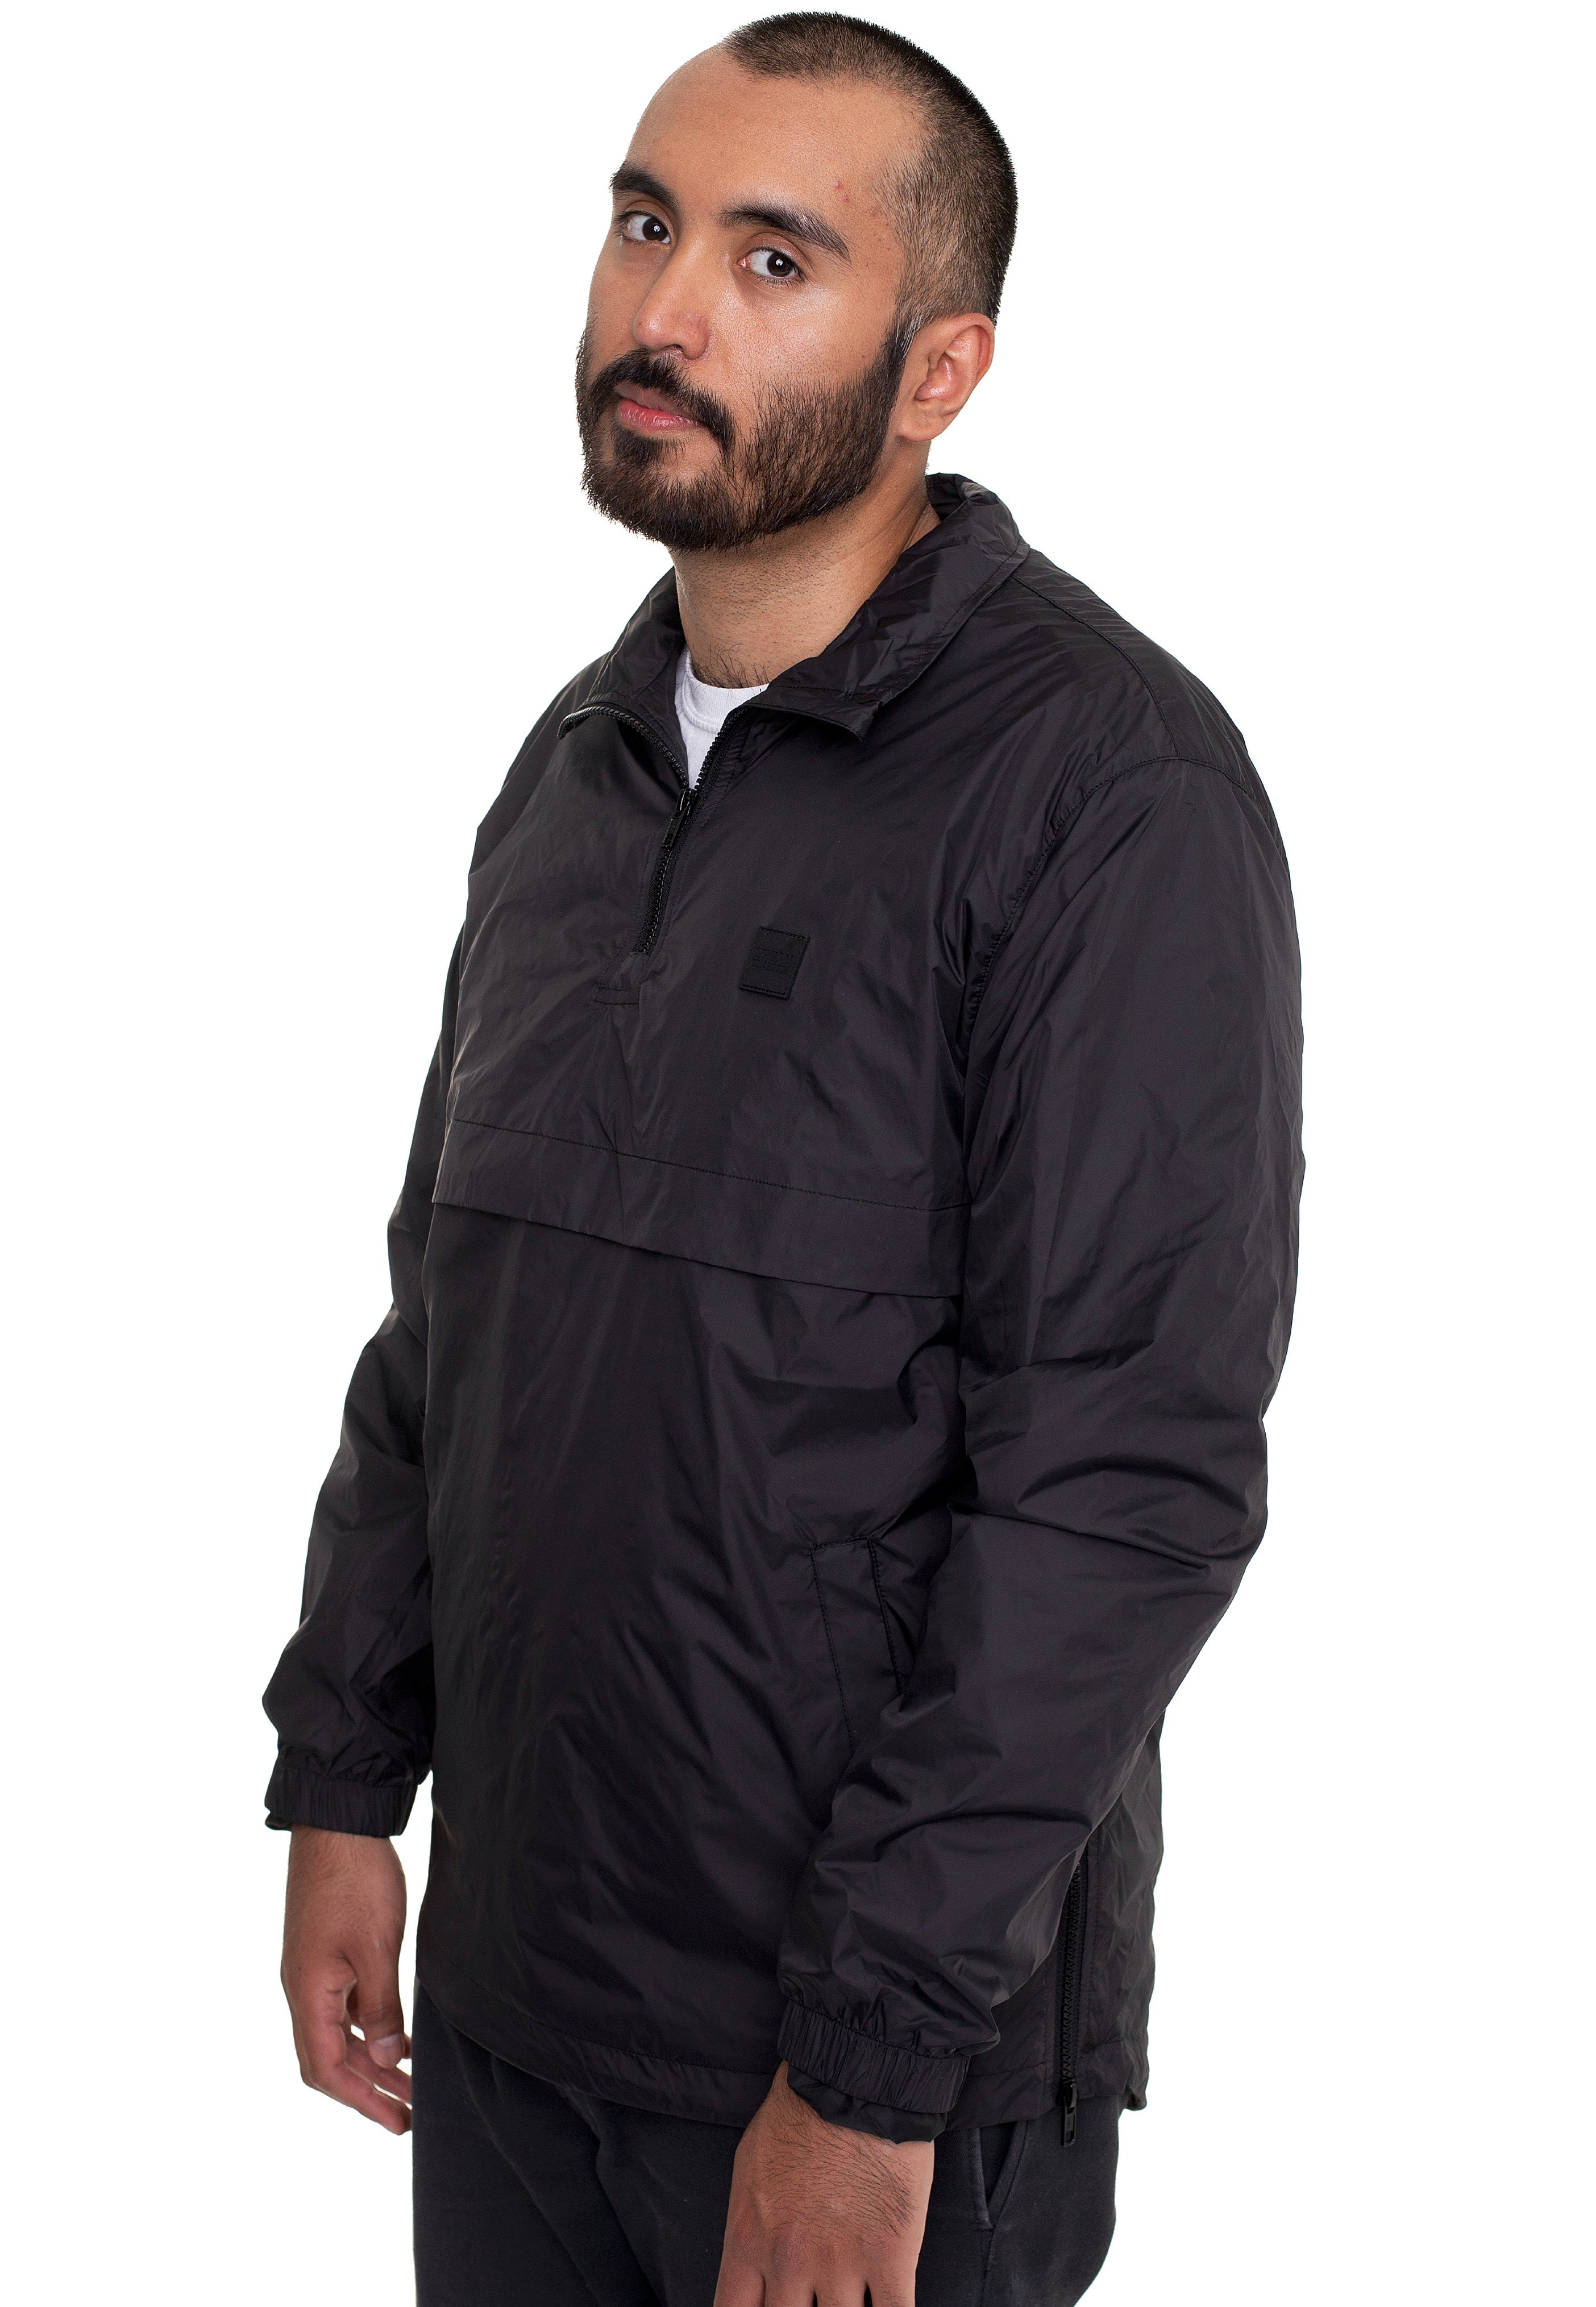 Urban Classics - Stand Up Collar Pull Over Black - Jacket